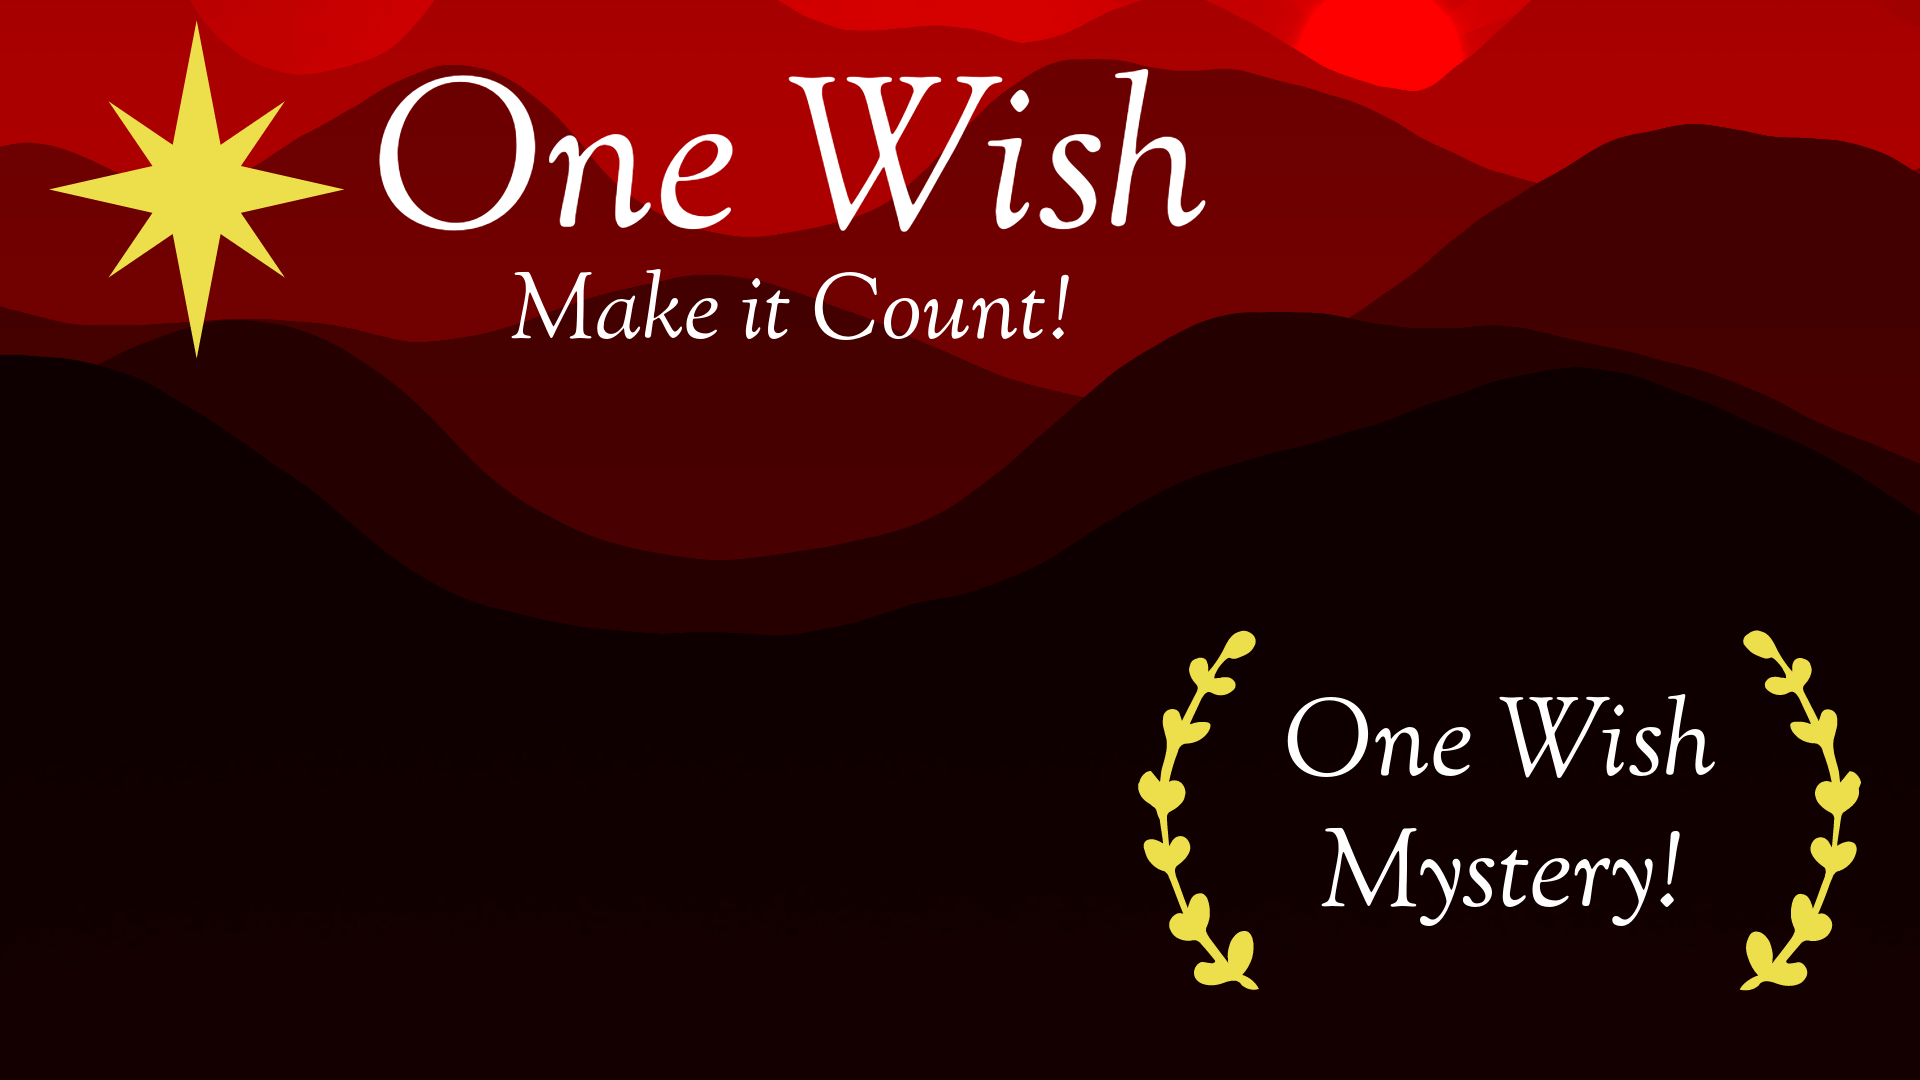 Make your Free One Wish online